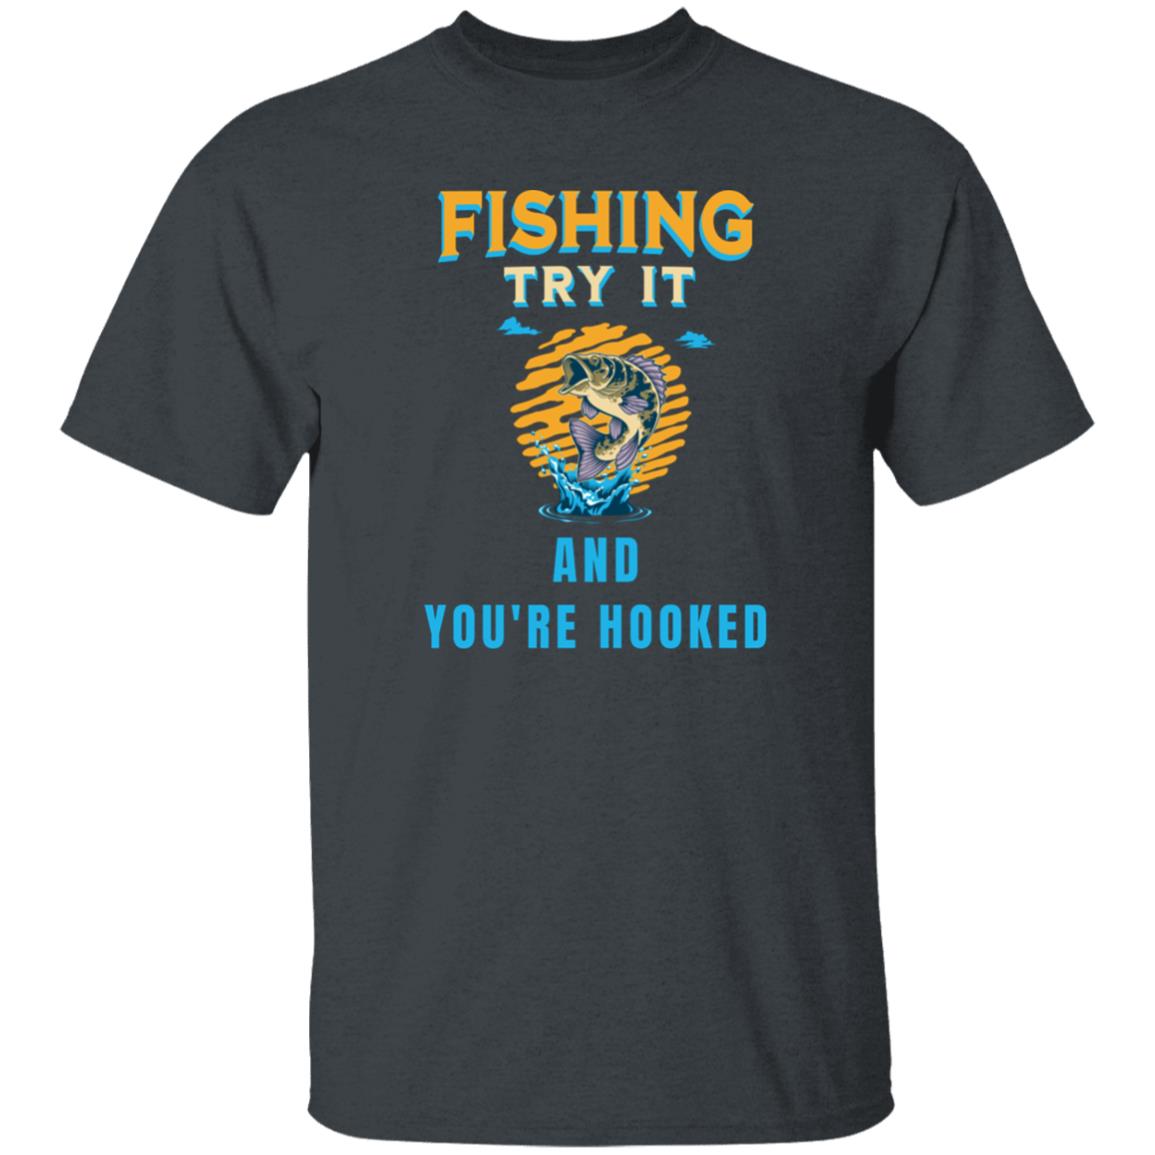 Fishing try it and you're hooked k t-shirt dark-heather